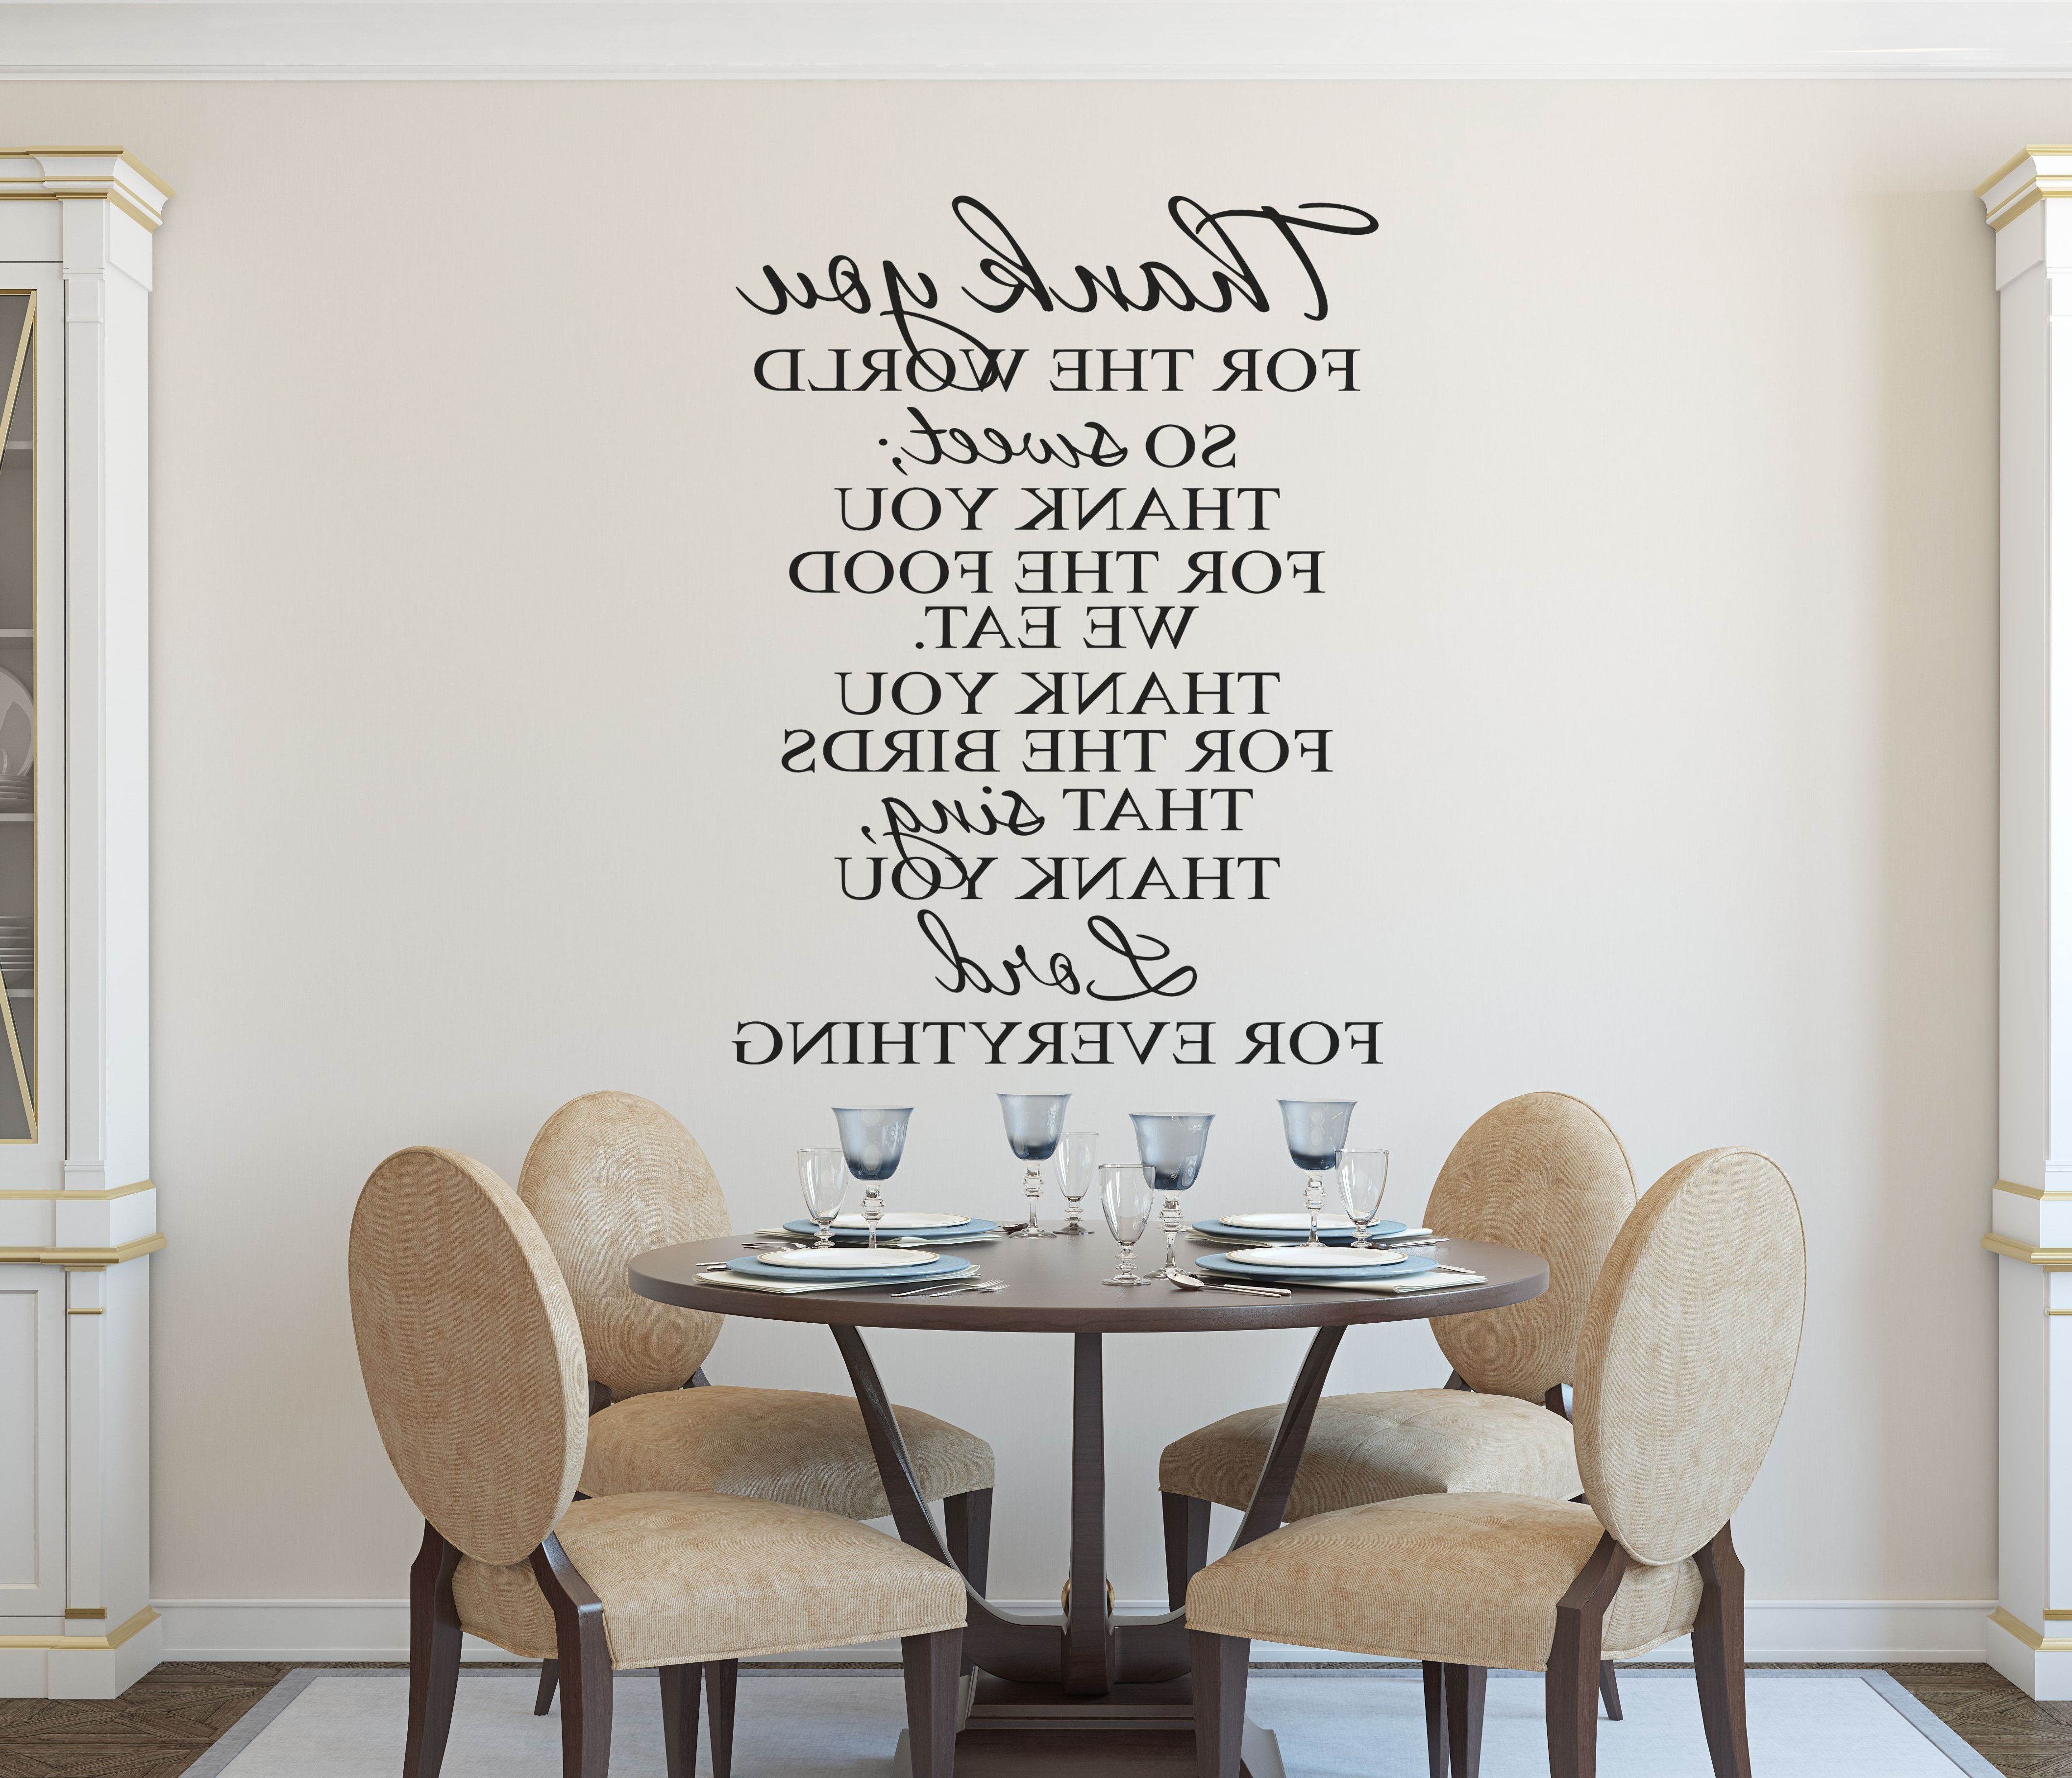 Scripture Vinyl Wall Art With Regard To Widely Used Bible Verse Wall Decals, Bible Verses, Home Decor, Wall Decal (View 4 of 15)